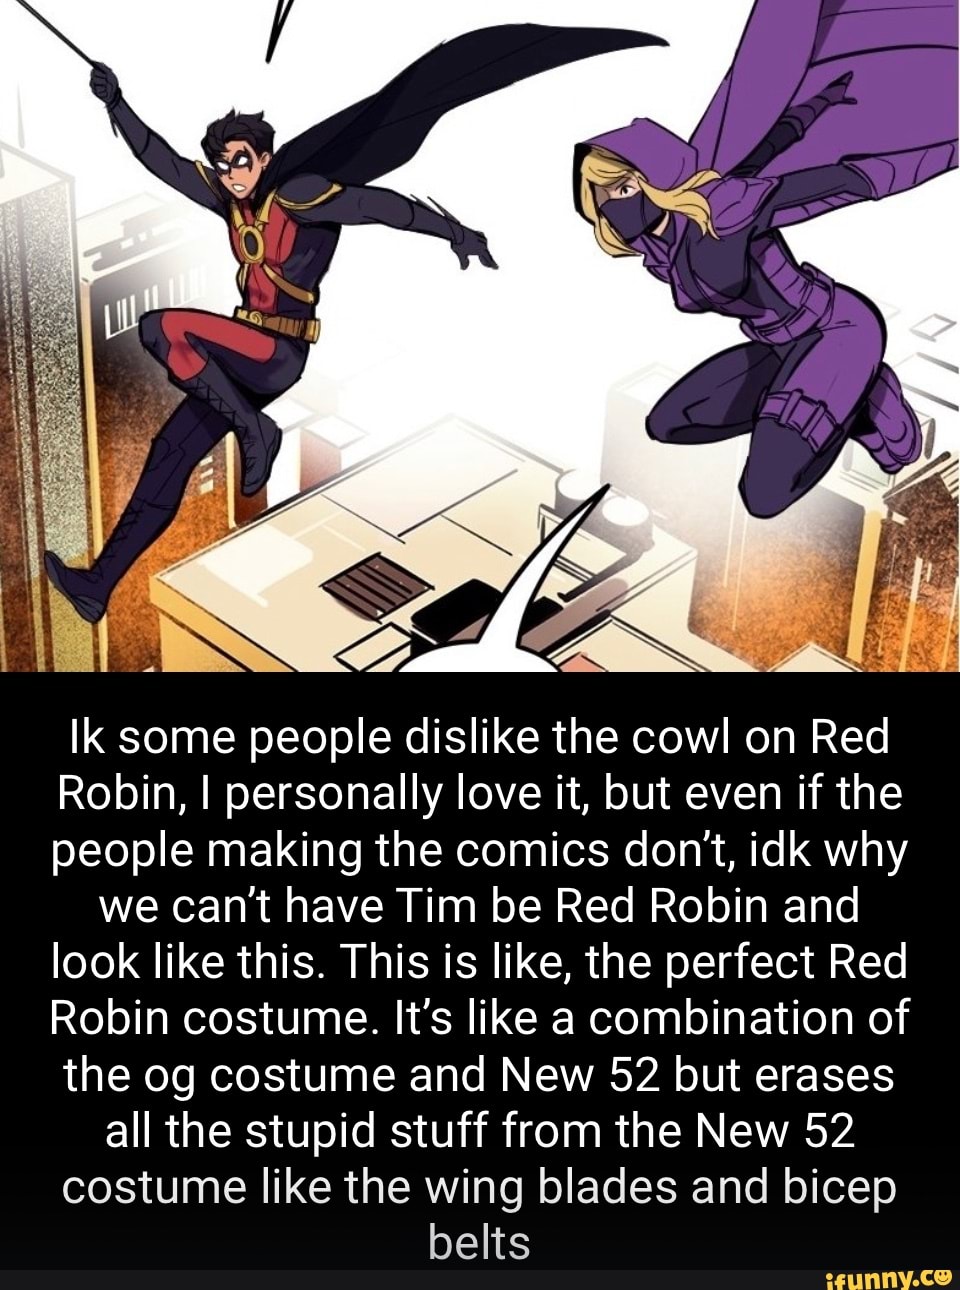 red robin cowl